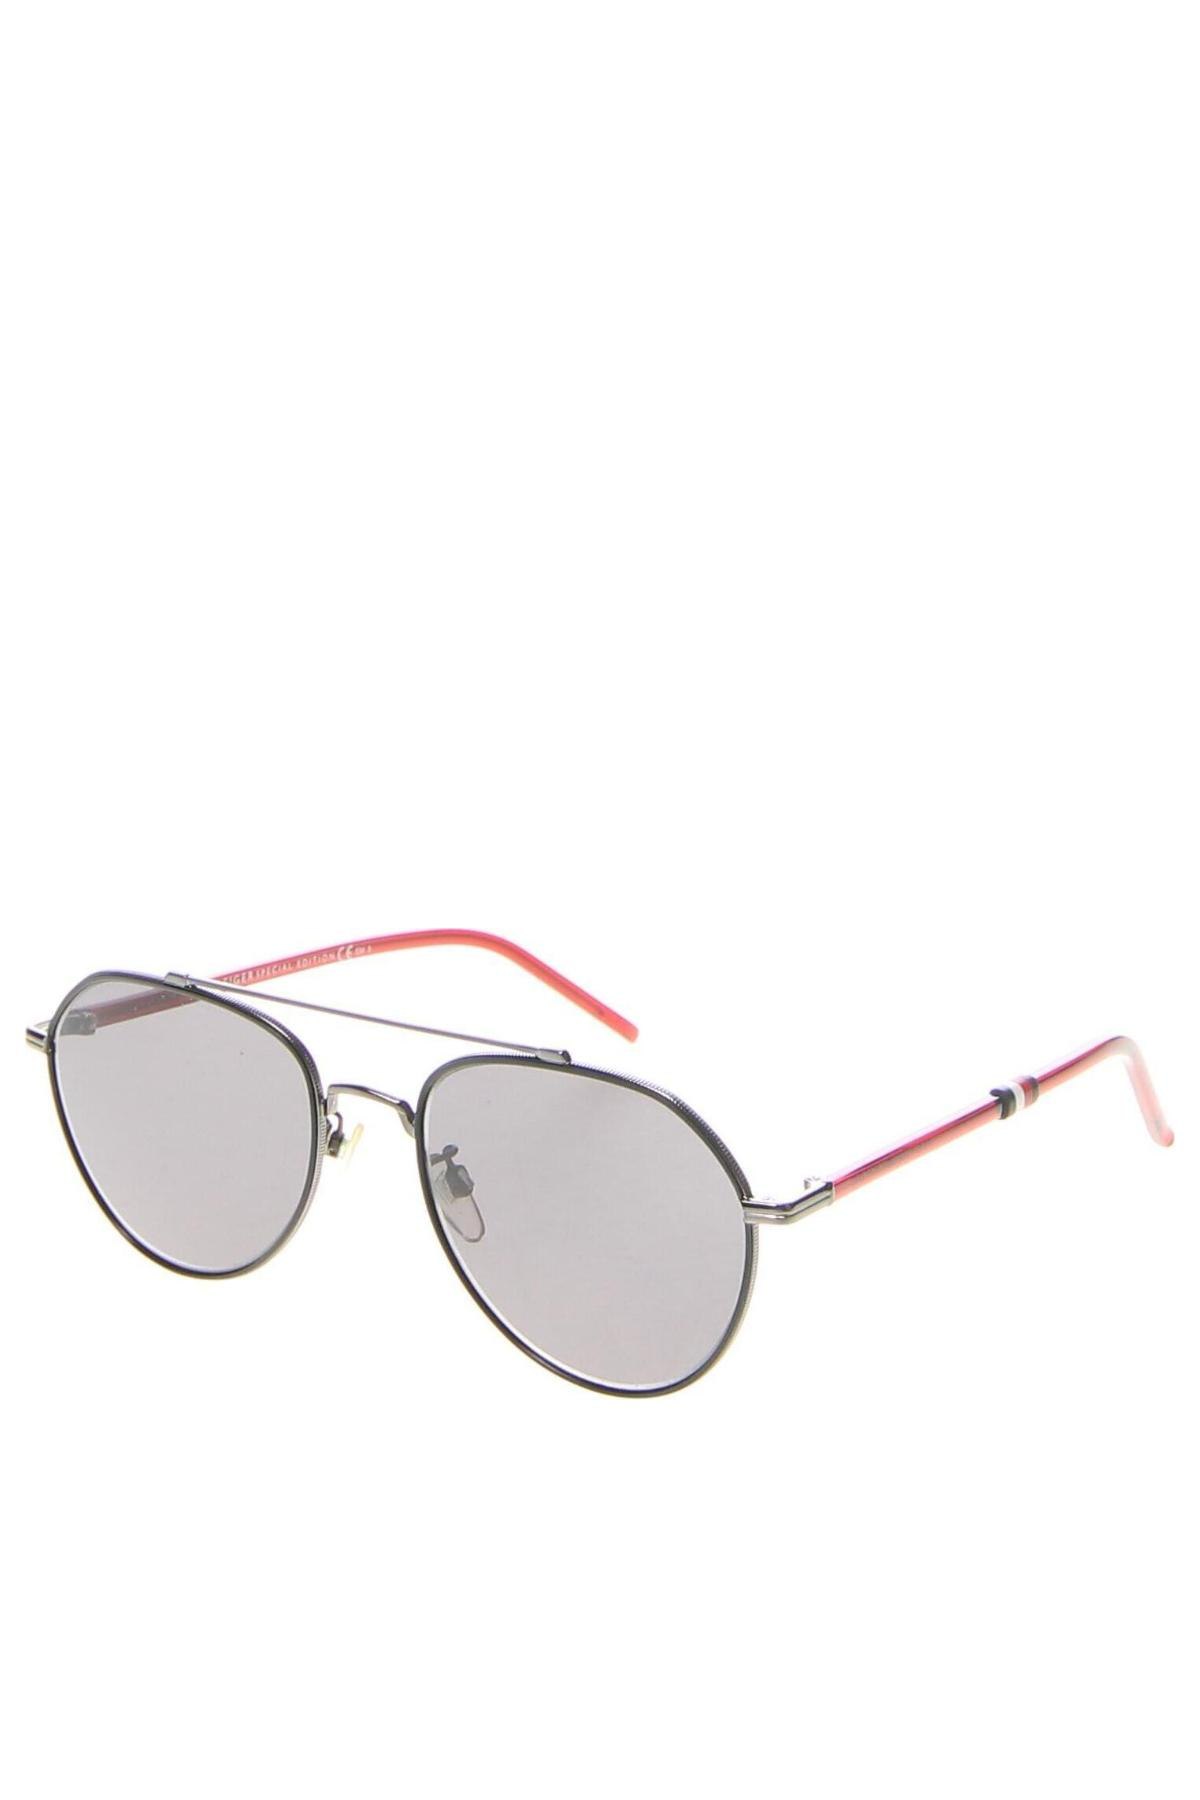 Sonnenbrille Tommy Hilfiger, Farbe Rot, Preis 53,00 €